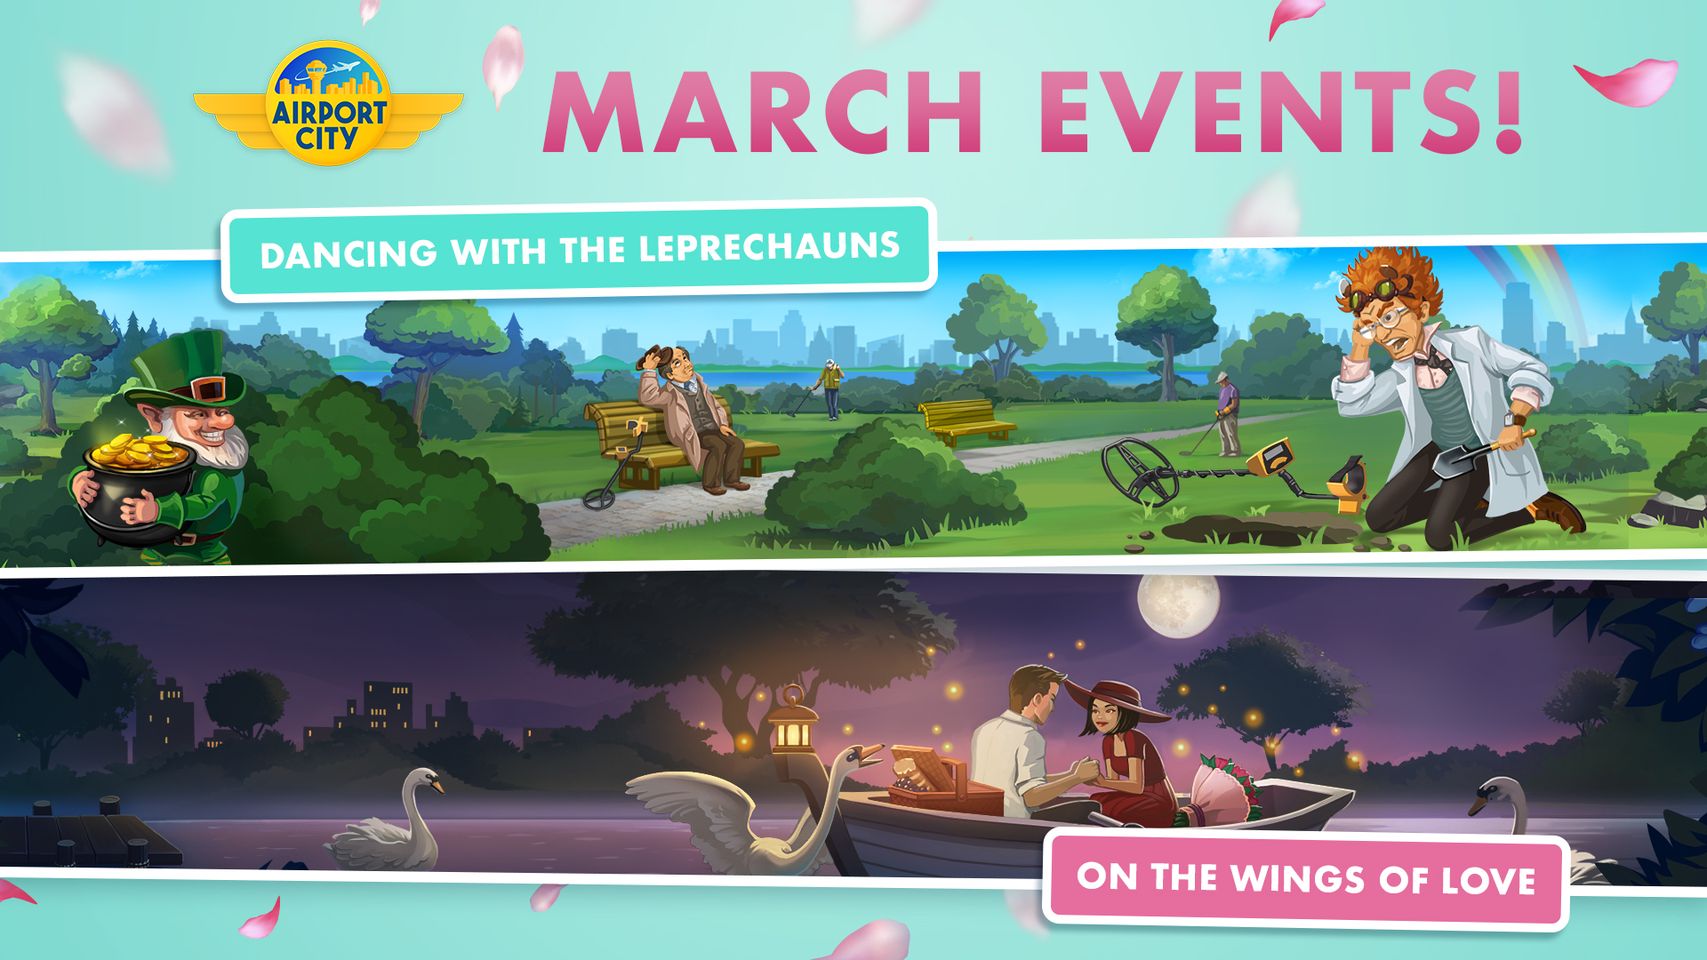 March events.jpg